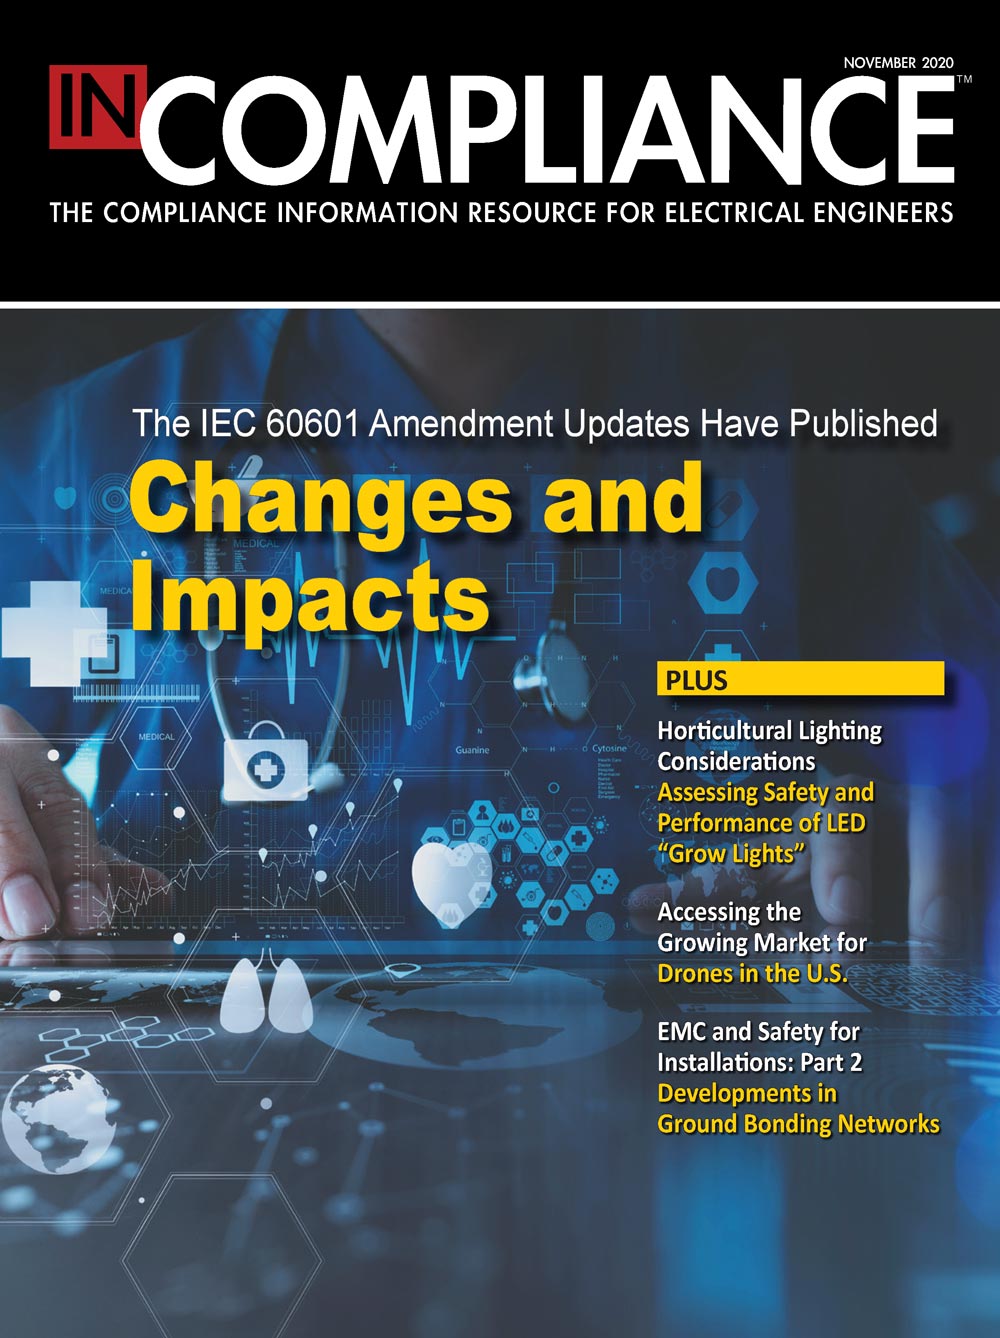 In Compliance November 2020 Cover